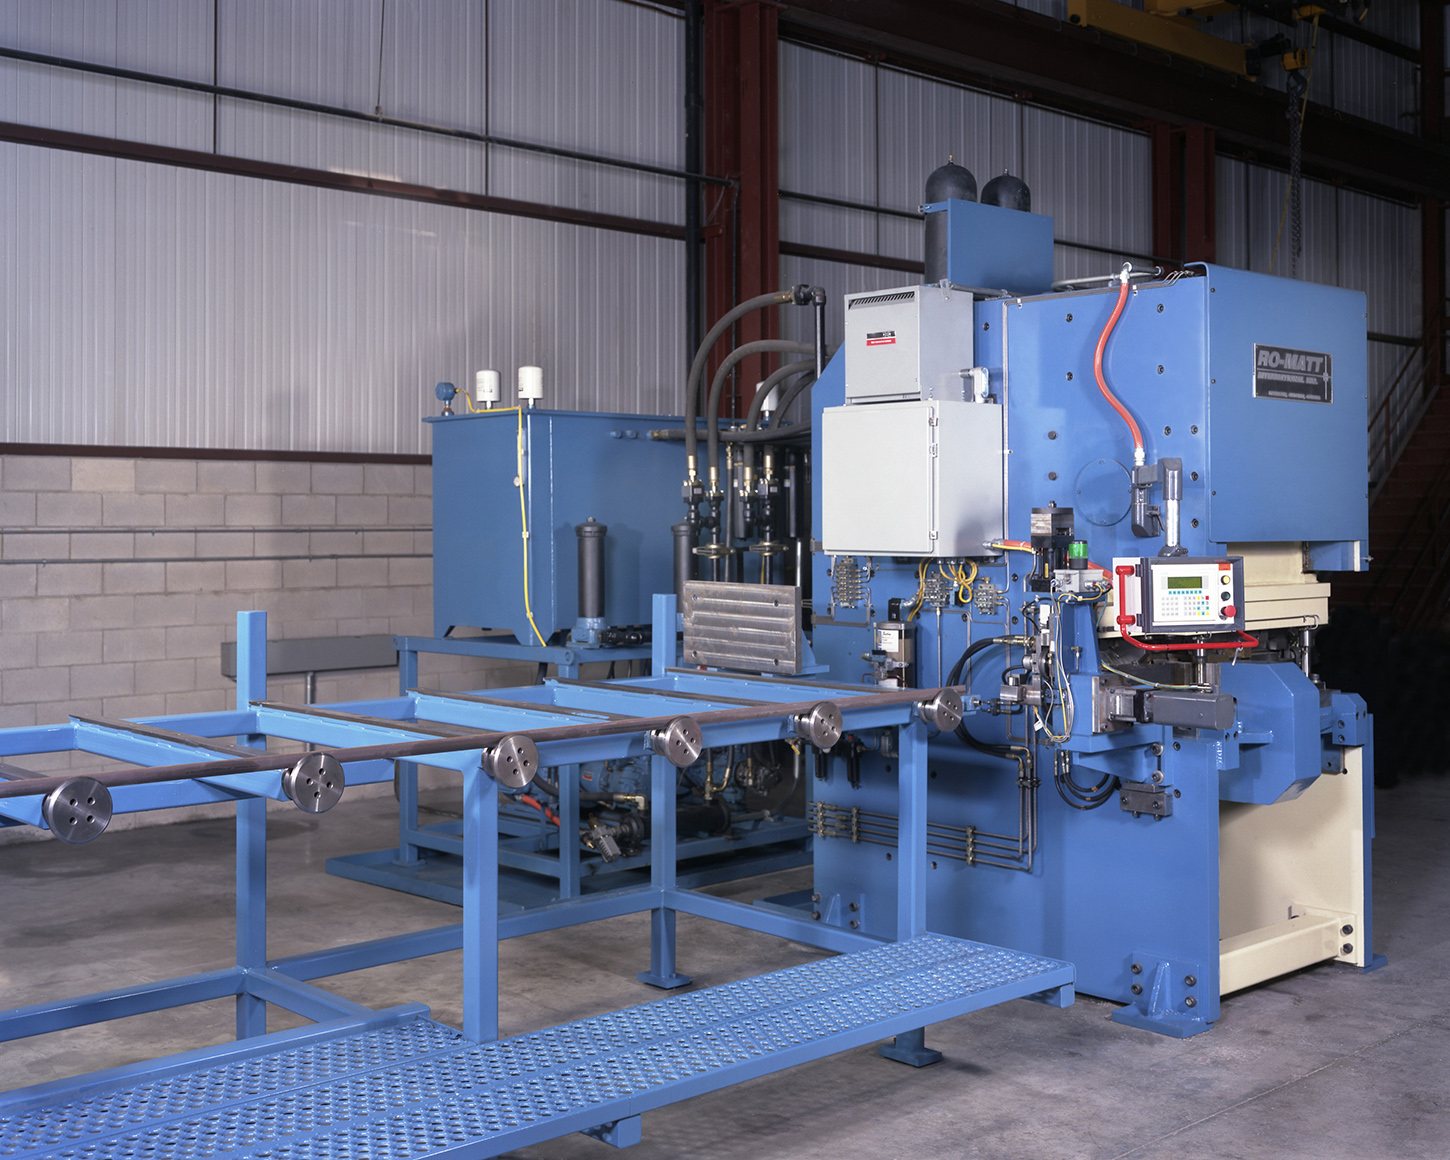 Double Acting Hydraulic Press with Progressive Die and Servo Loading System